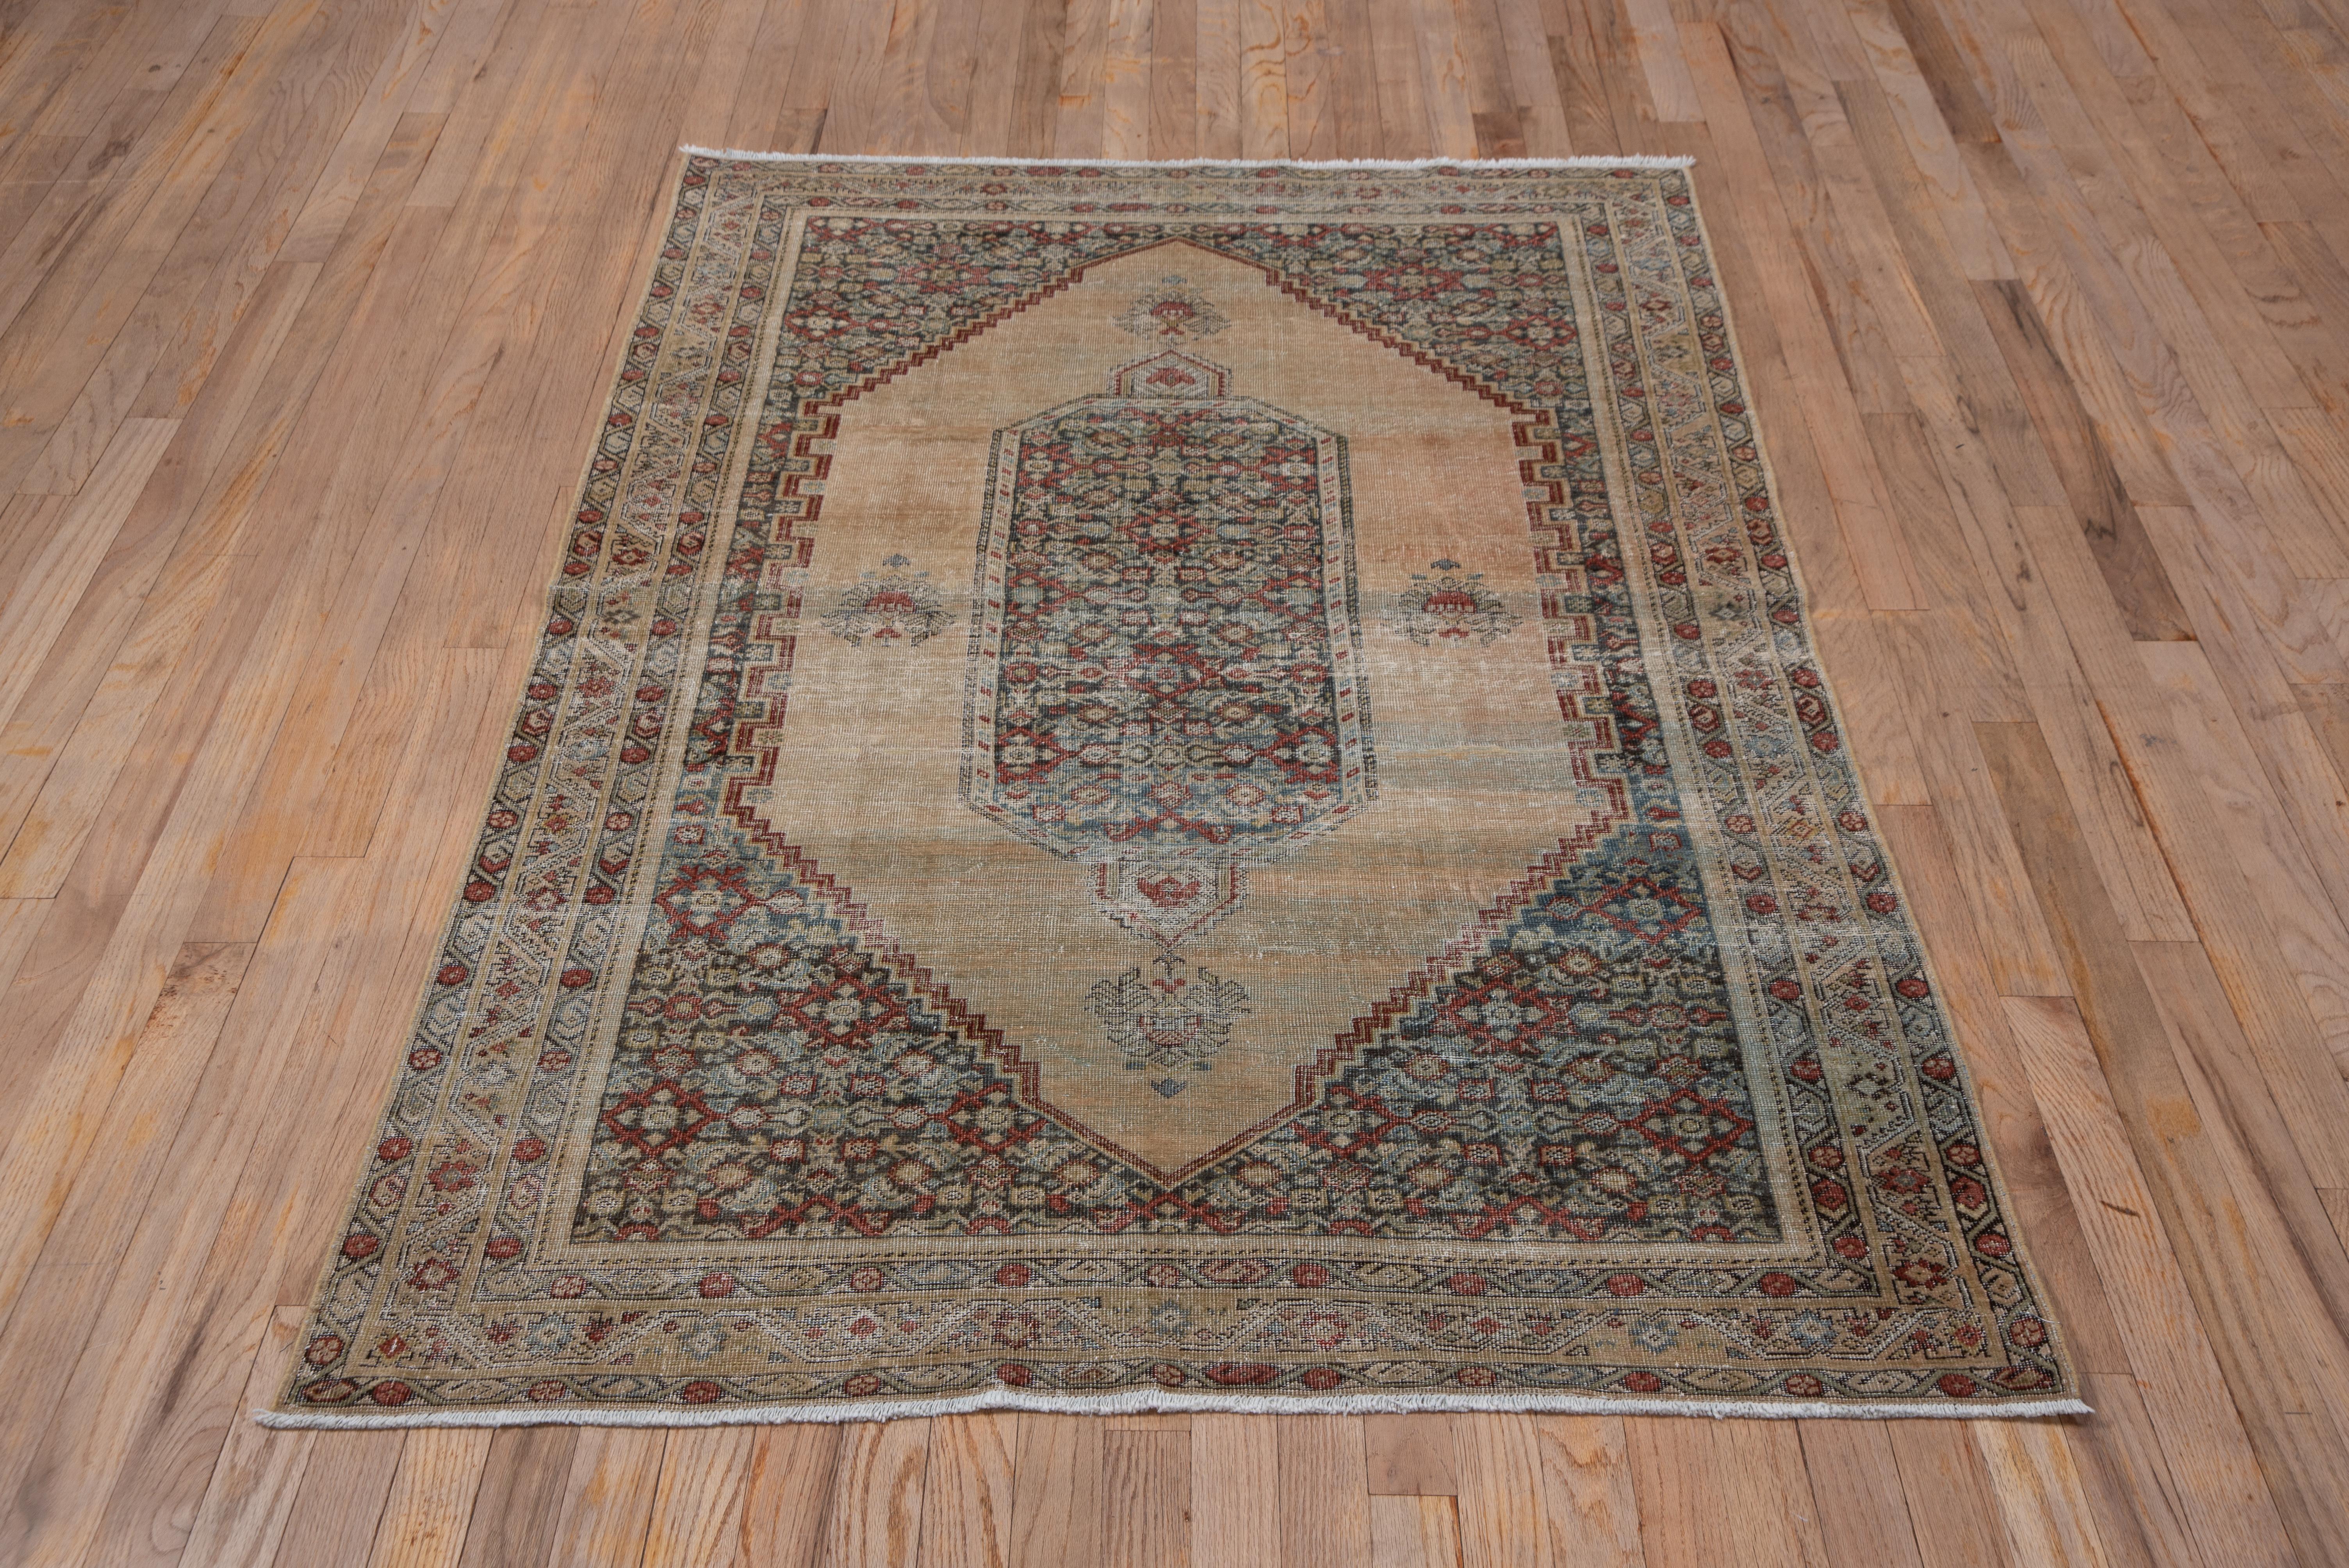 Just edging into the Farahan-Sarouk period, this west Persian village scatter has a fine weave, straw, notched sub field and brown small scale Herati corners. The central octagonal cartouche shows a slate ground Herati and pattern, and there are